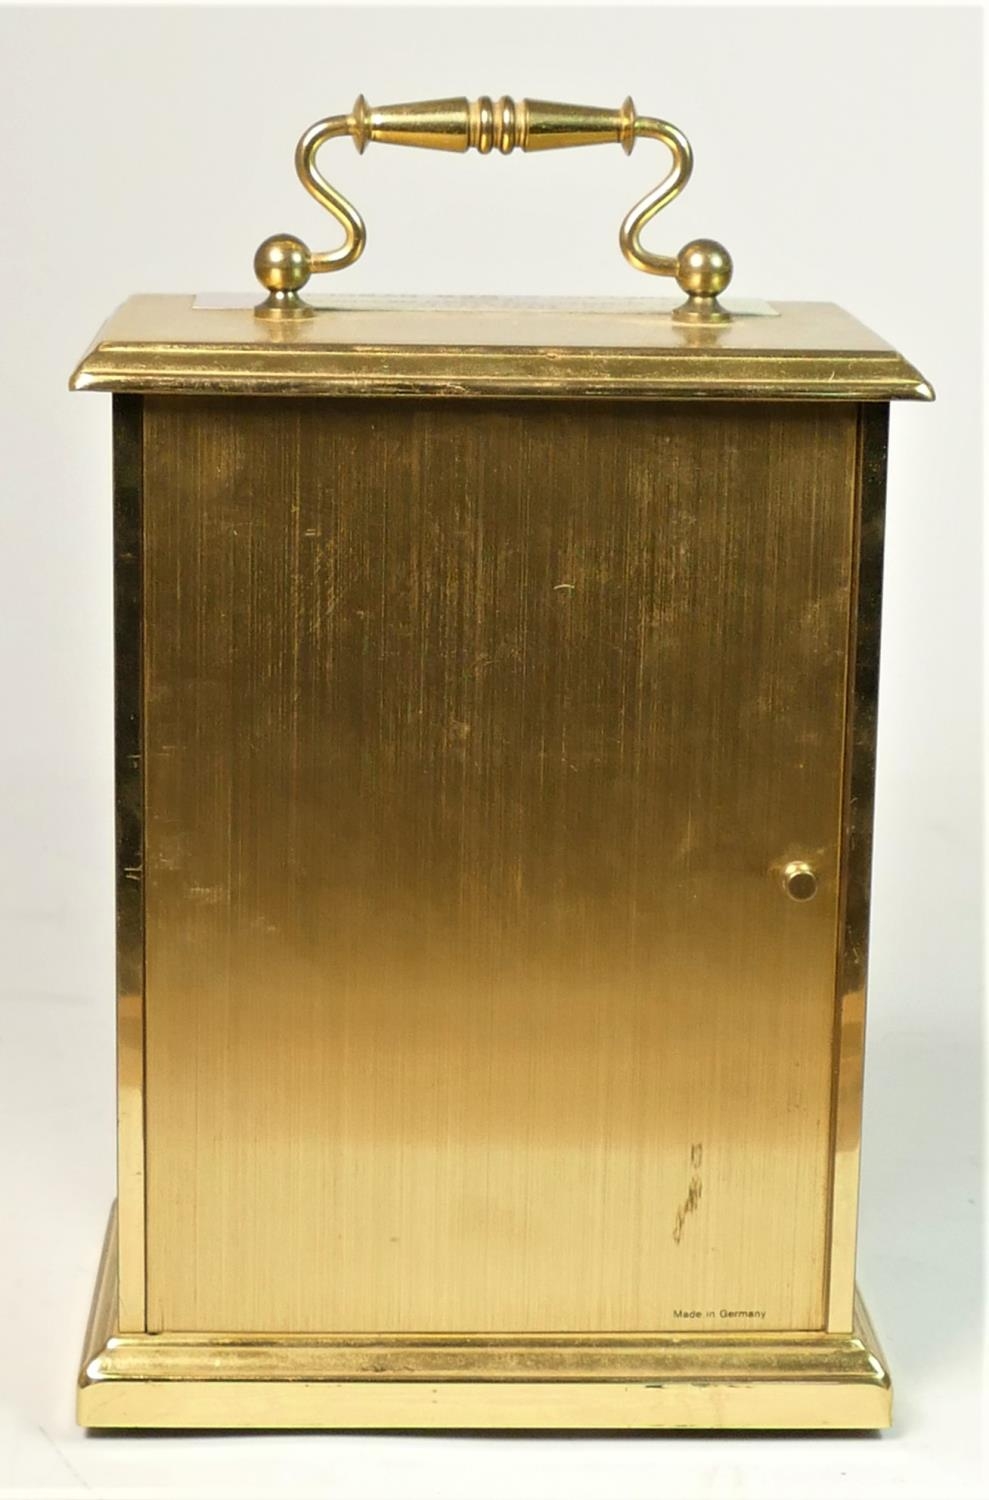 A German brass mantle clock with Roman numeral dial, with pendulum, 19cm - Image 3 of 4